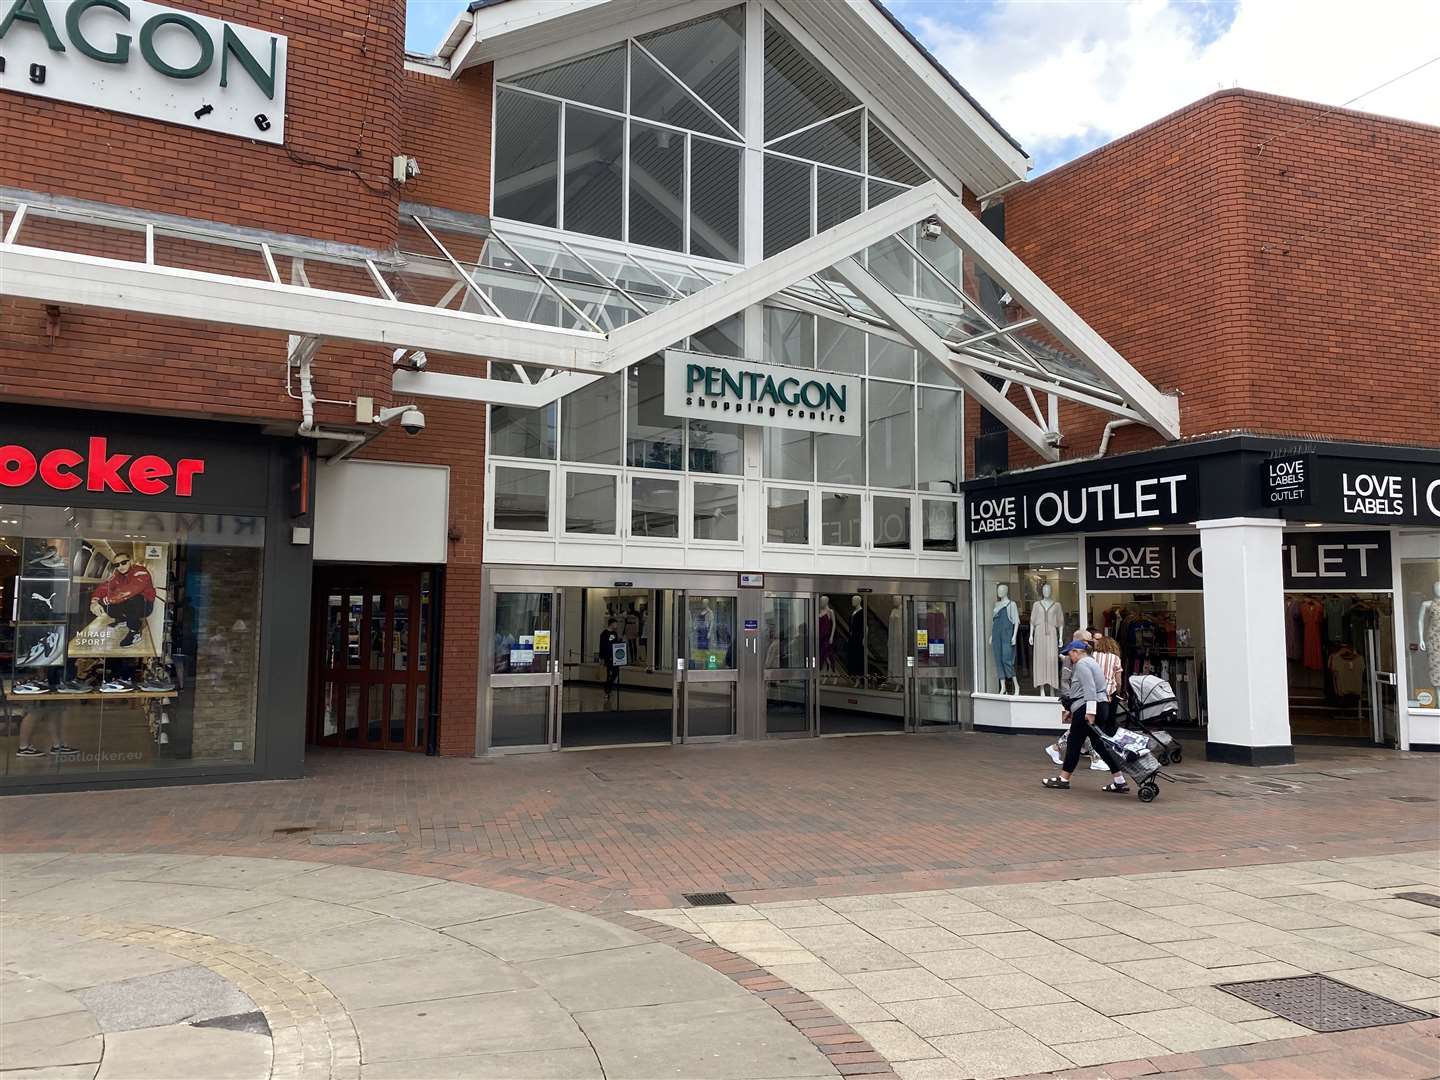 The hunt led to Chatham's Pentagon Shopping Centre